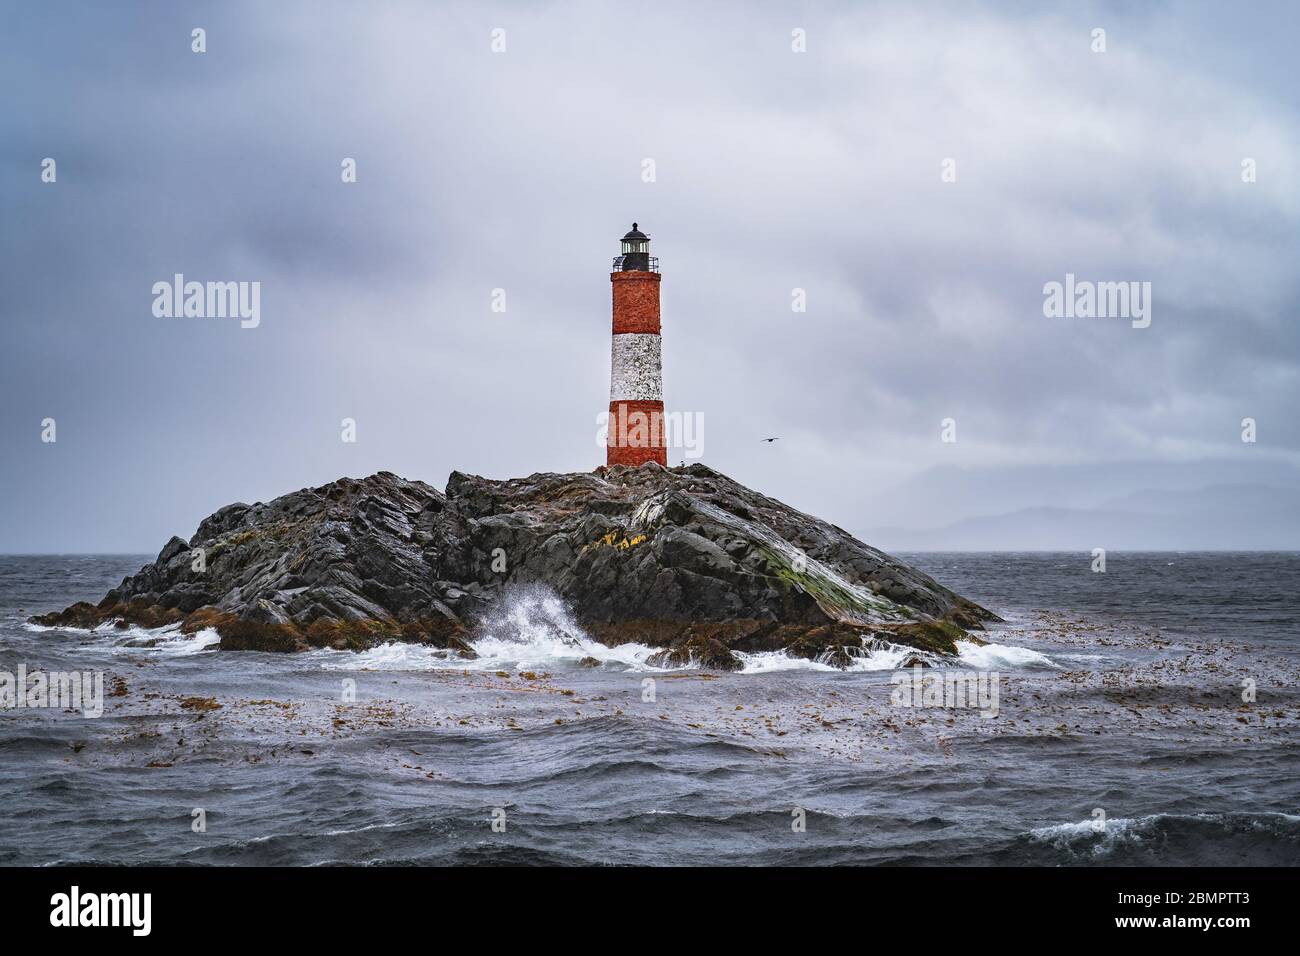 Les Eclaireurs Lighthouse aka the Lighthouse at the End of the World, in the Beagle Channel near Ushuaia, Tierra del Fuego, southern Argentina. Stock Photo